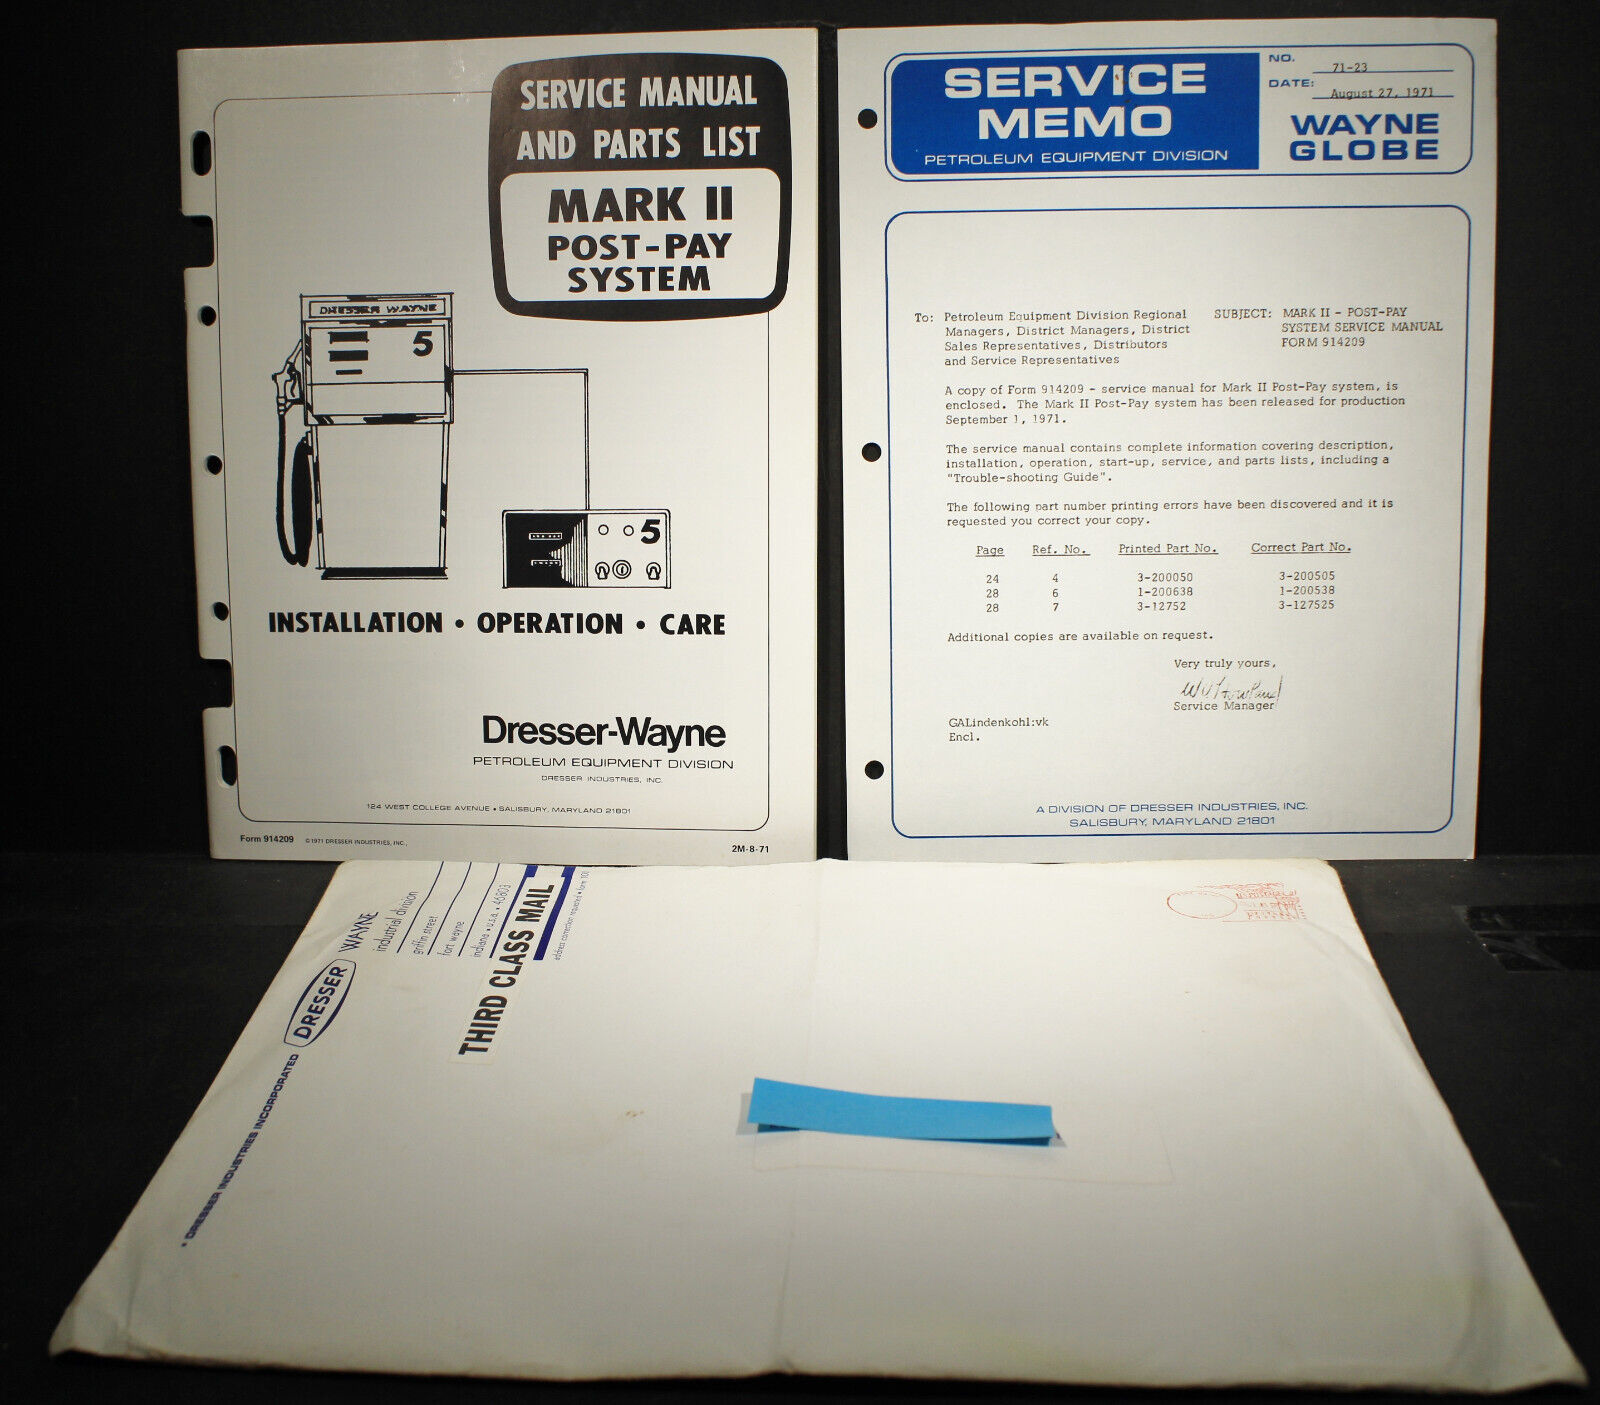 Dresser-Wayne Service Manual and Parts List for Mark 11 Post-Pay System